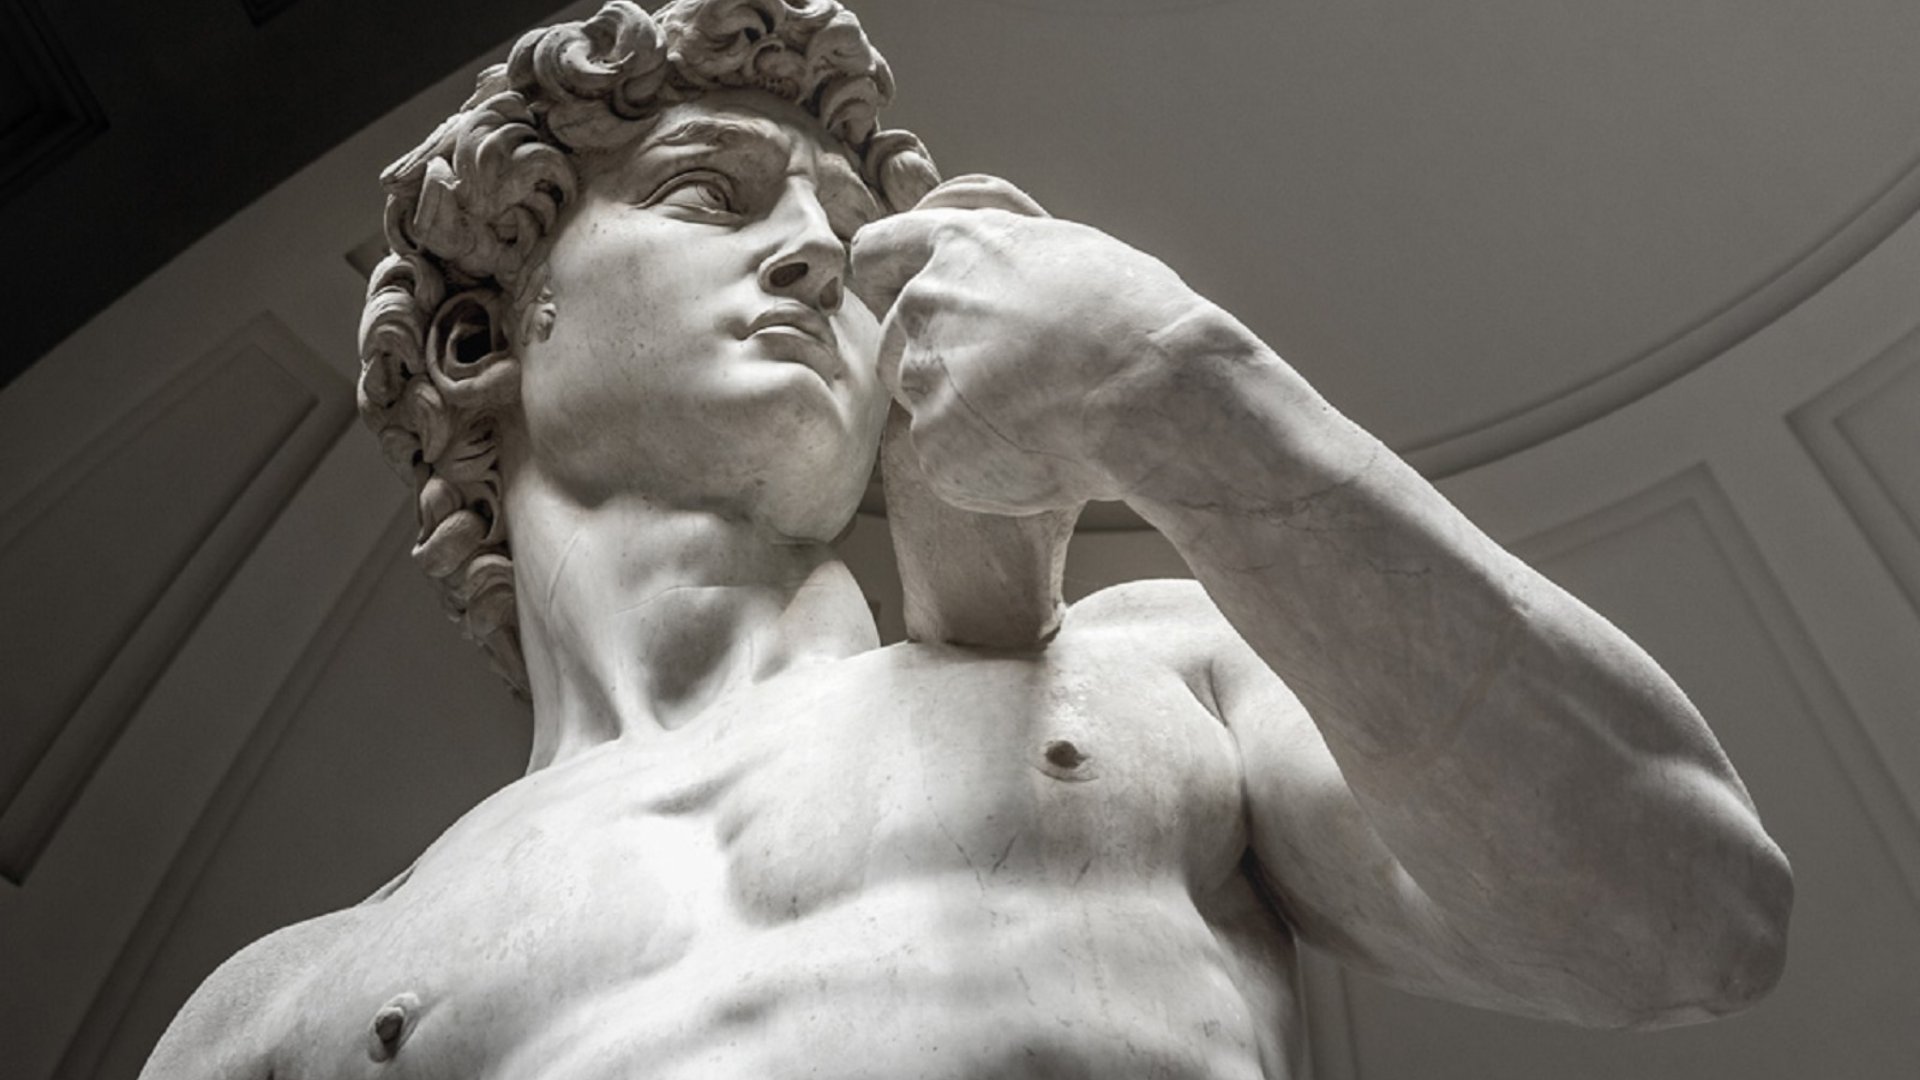 Guided tour of Florence including a visit to Michelangelo’s David